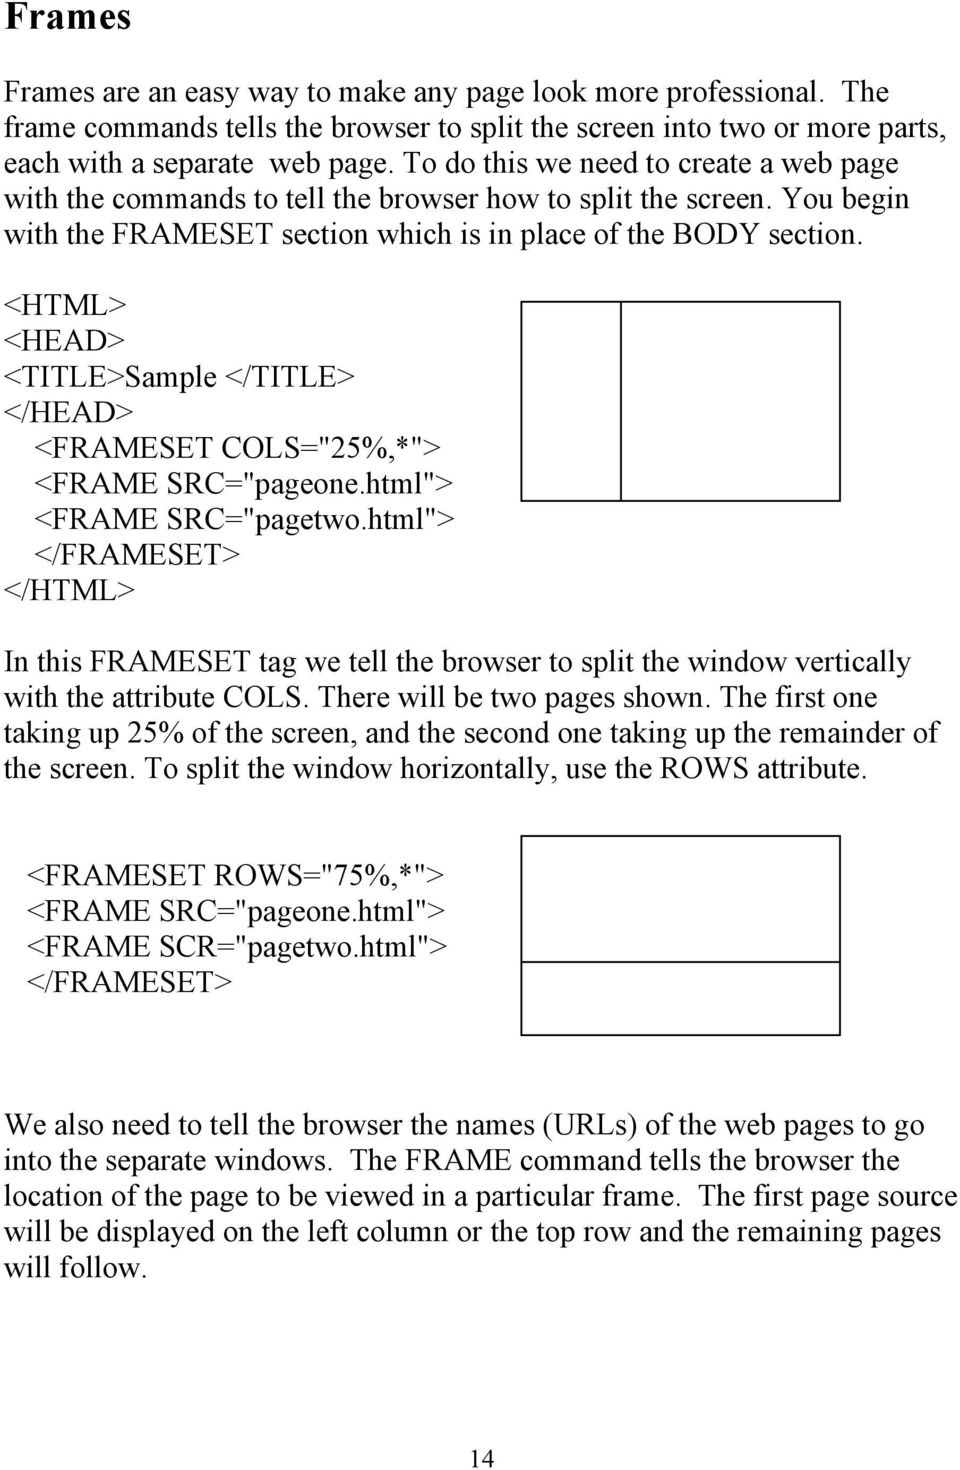 <HTML> <HEAD> <TITLE>Sample </TITLE> </HEAD> <FRAMESET COLS="25%,*"> <FRAME SRC="pageone.html"> <FRAME SRC="pagetwo.